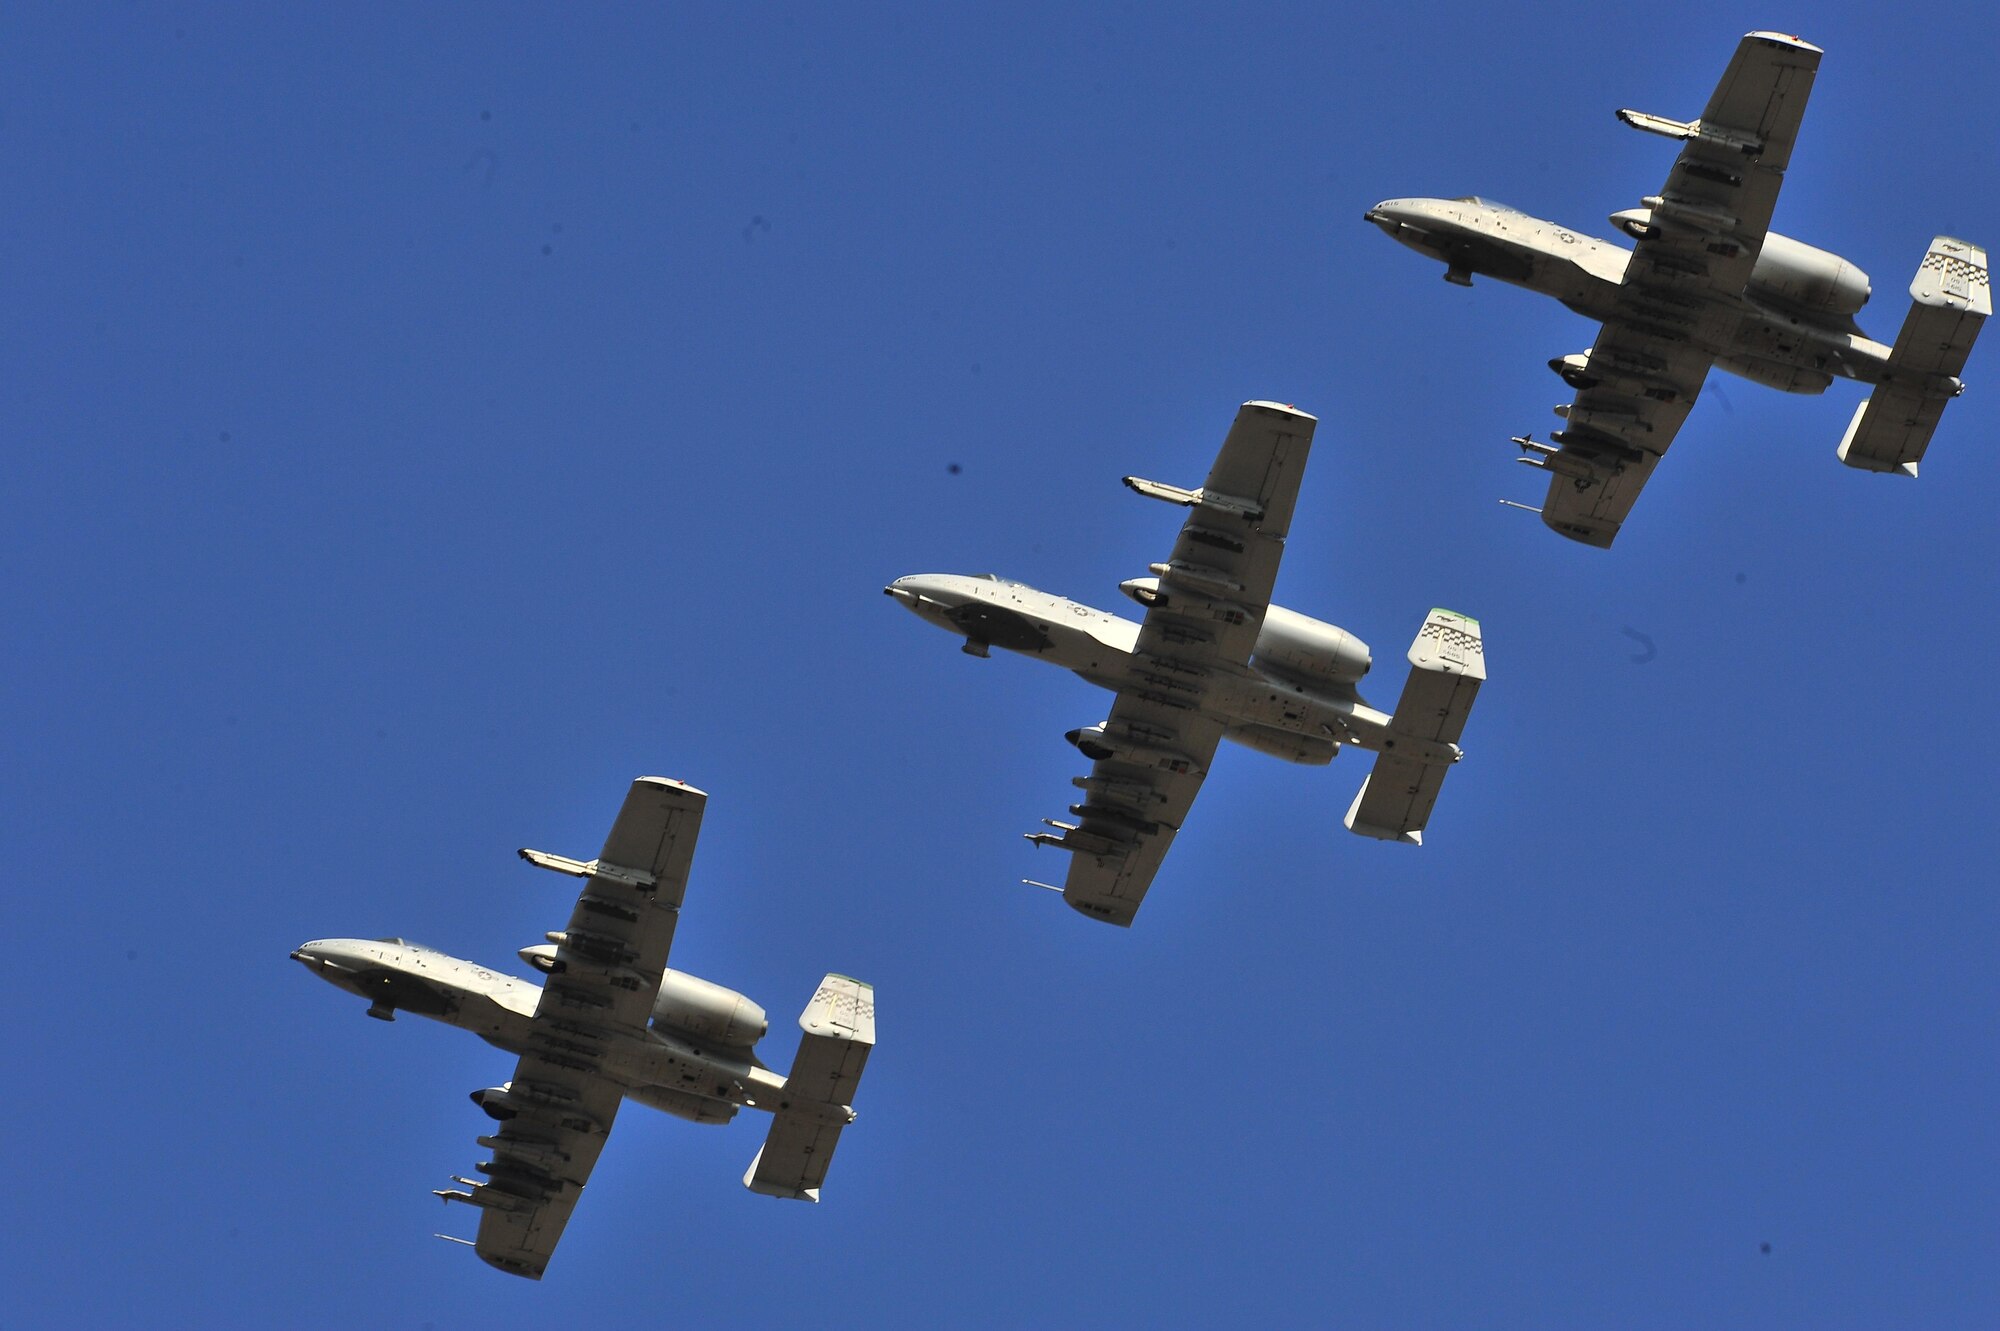 Three A-10 Thunderbolt IIs assigned to the 25th Fighter Squadron perform a flyover during Air Power Day 2011 at Osan Air Base, Republic of Korea. Air Power Day 2016 will include performances from A-10s and F-16 Flying Falcons assigned to Osan in additions to multiple other acts and static displays. (U.S. Air Force courtesy photo/released)